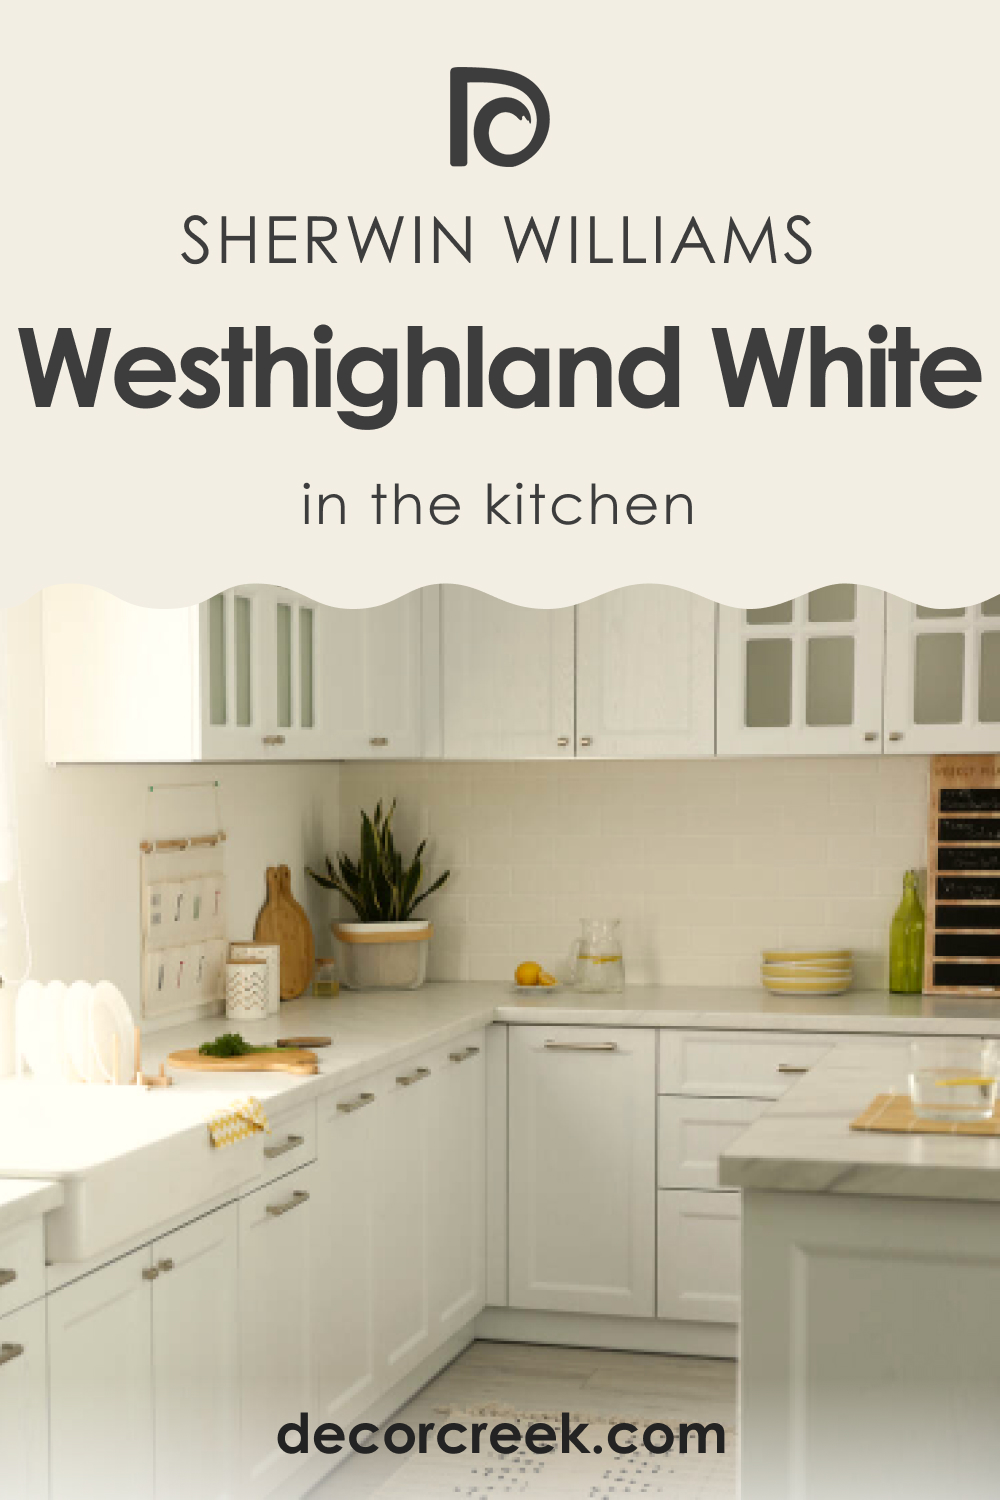 How to Use SW 7566 Westhighland White for the Kitchen?